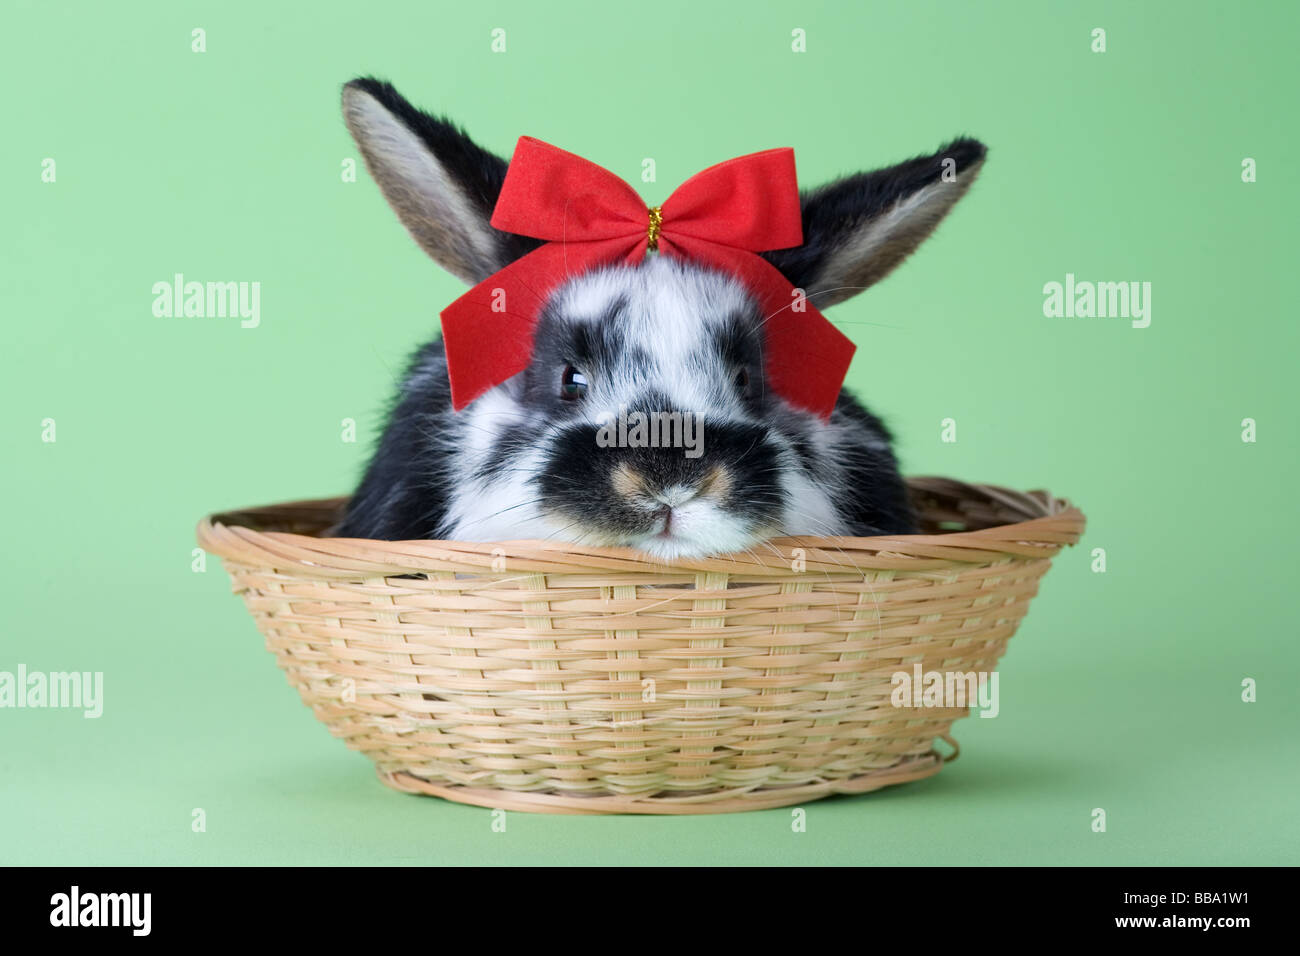 spotted bunny with red bow tie isolated on green Stock Photo